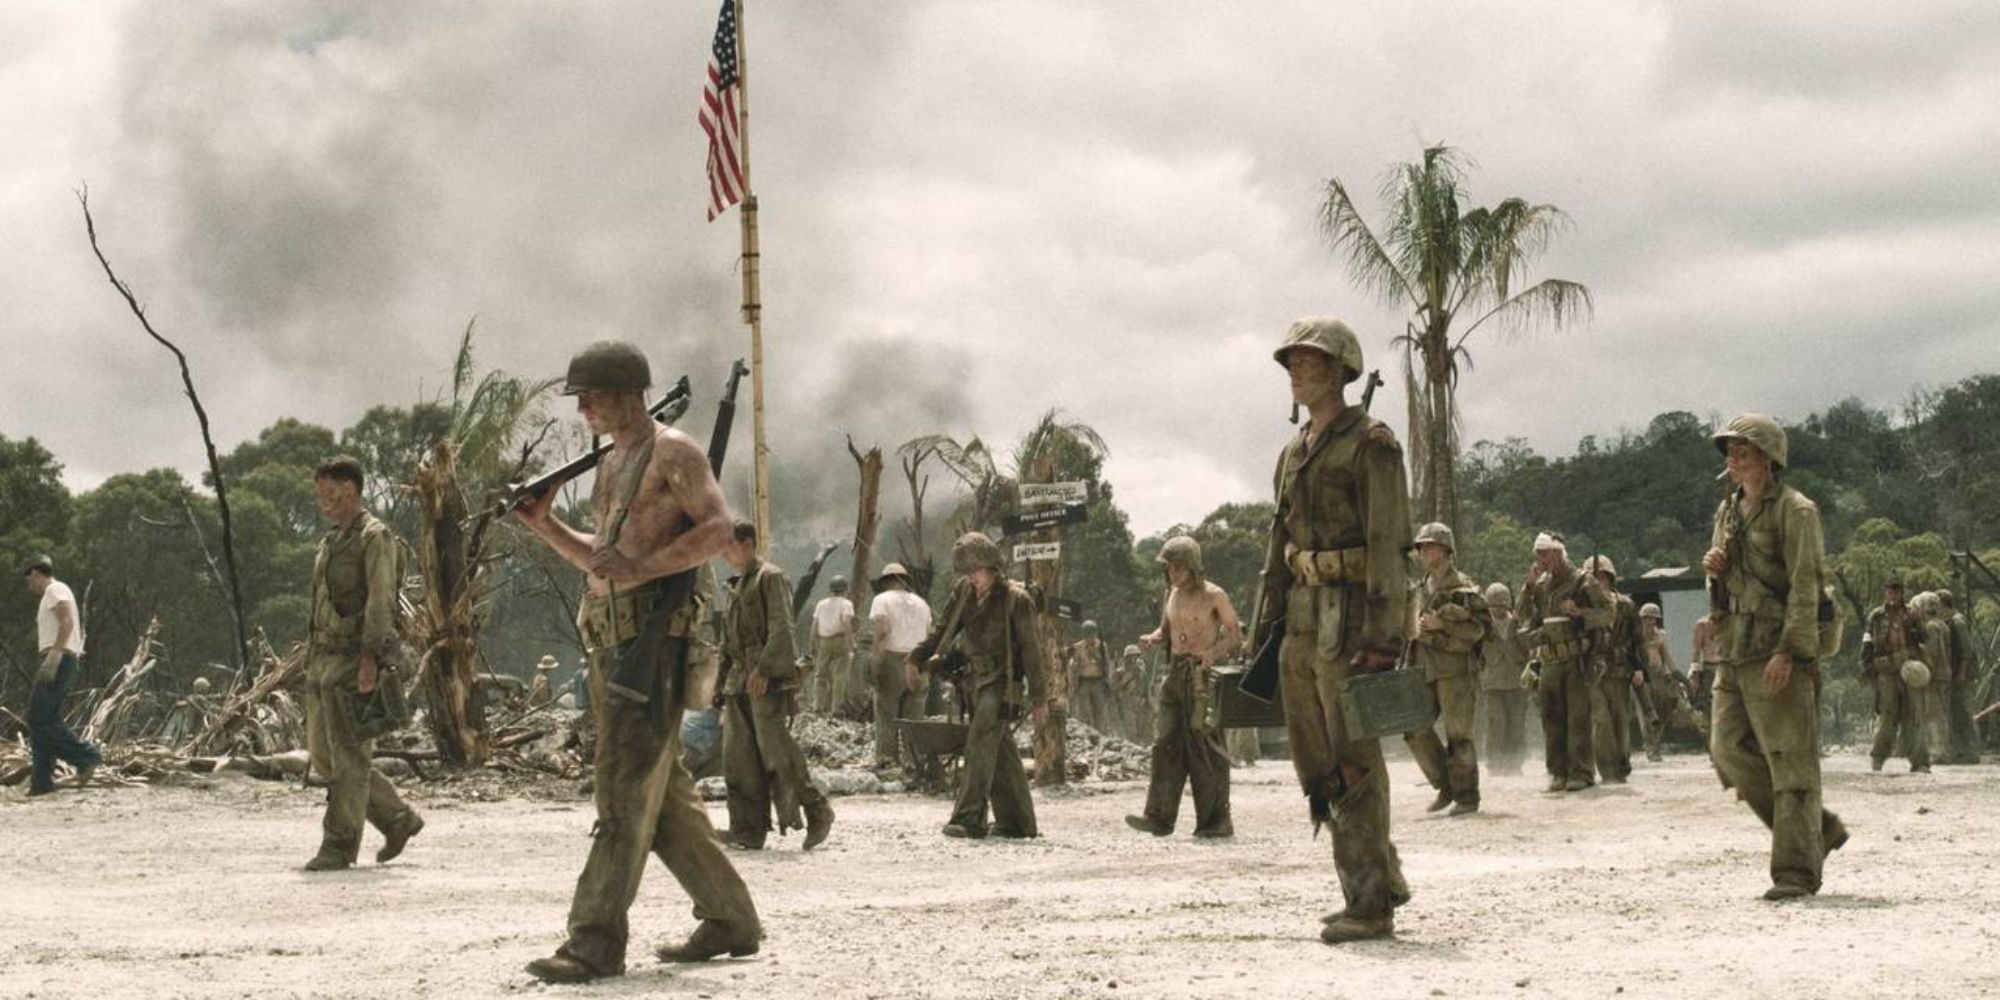 Soldiers on the beach in the miniseries The Pacific.